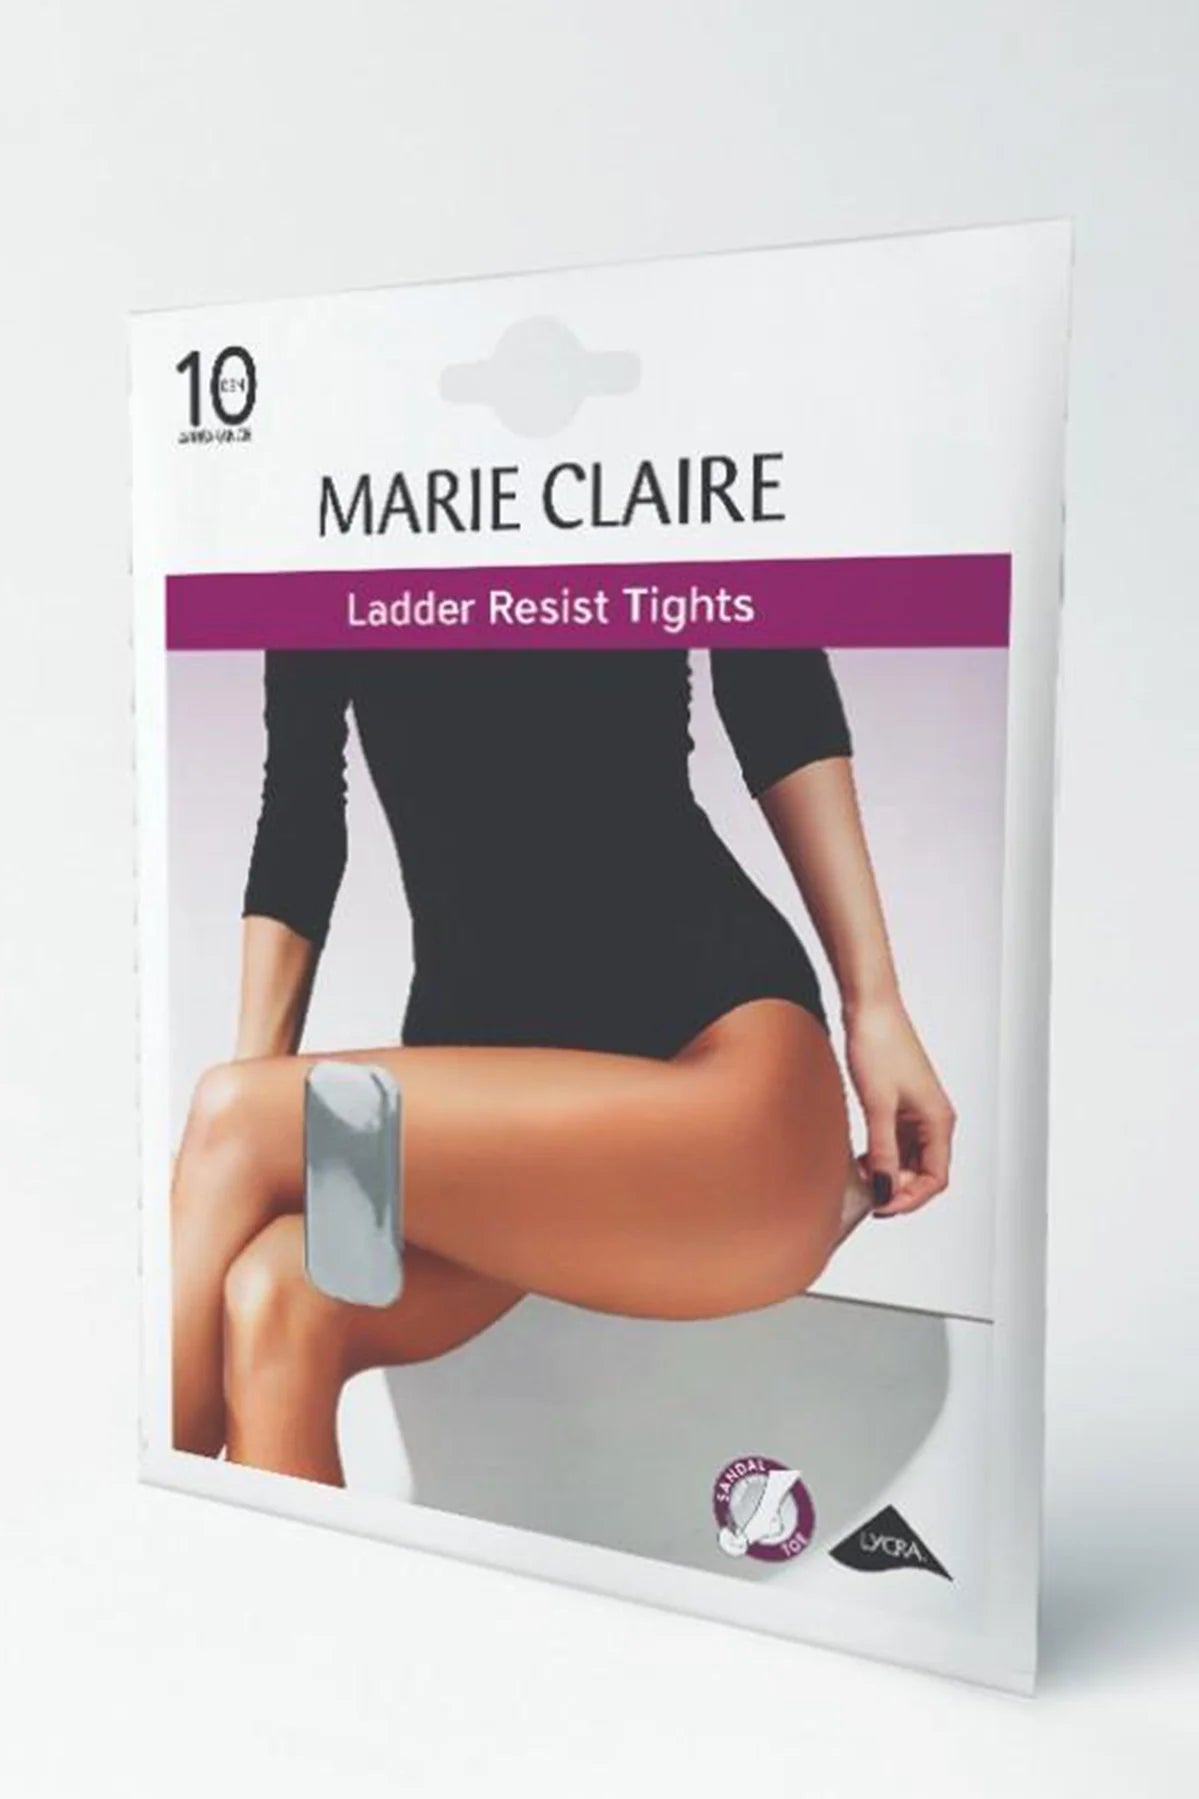 Marie Claire - Ladder Resist Tights MC4360